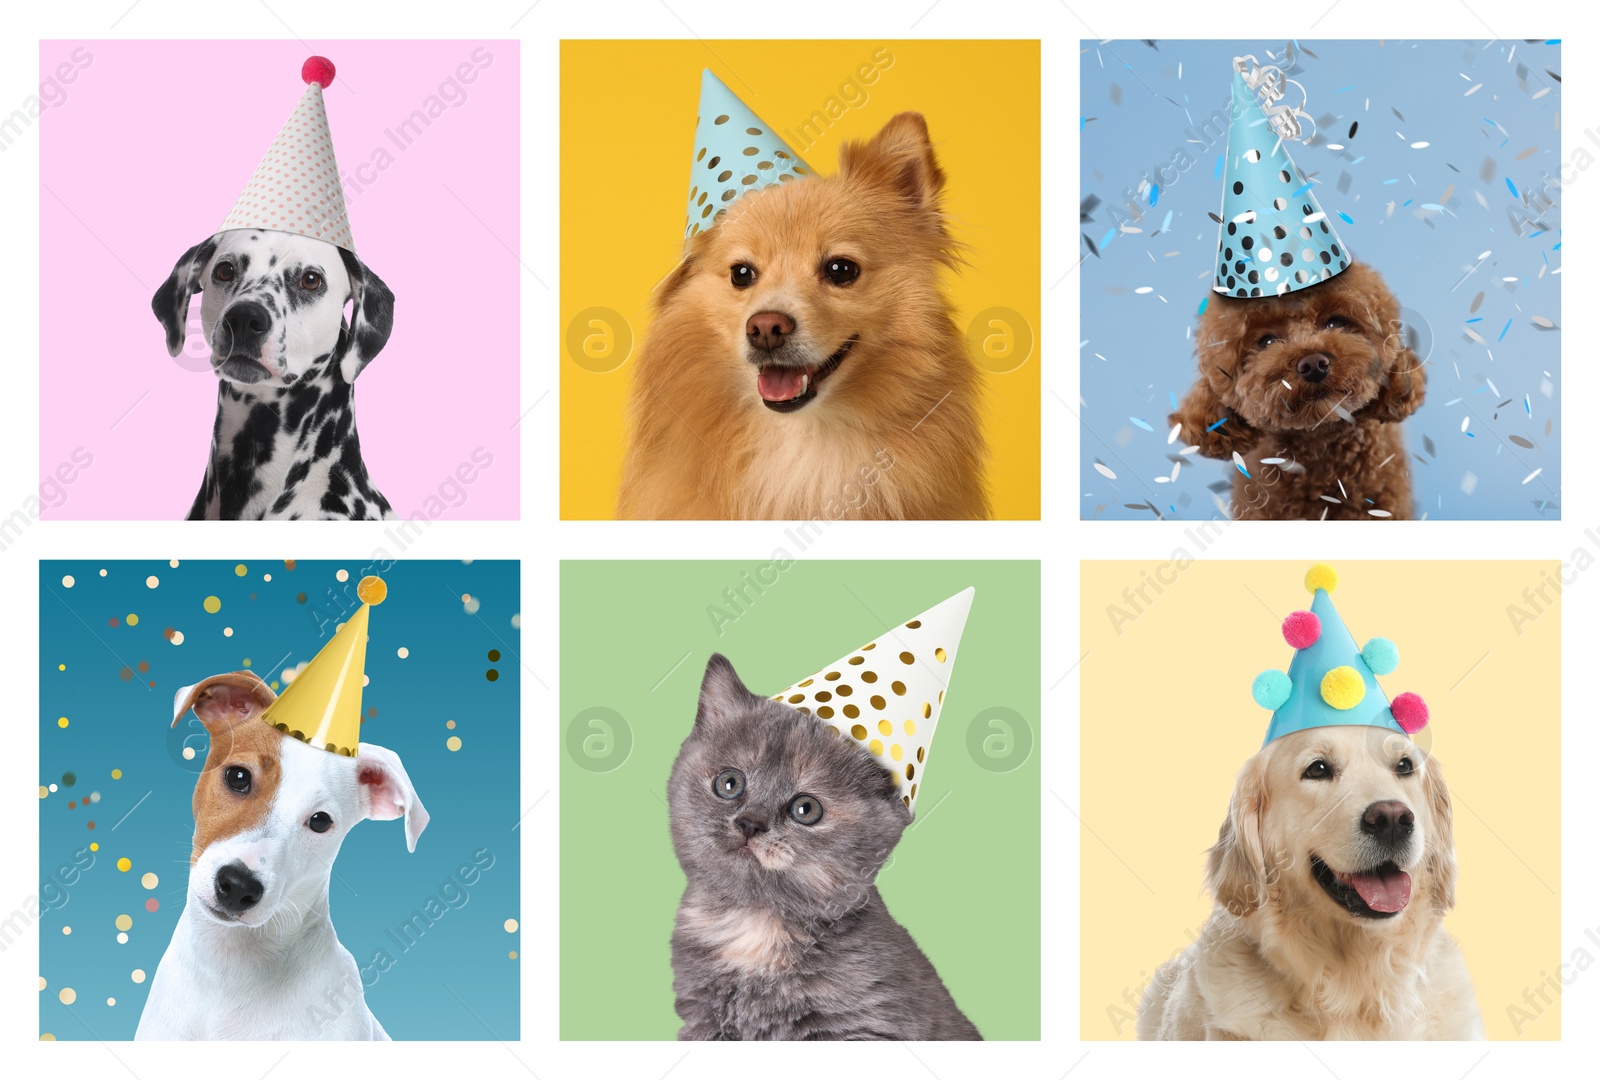 Image of Adorable birthday cat and dogs in party hats on different color backgrounds, collage of portraits